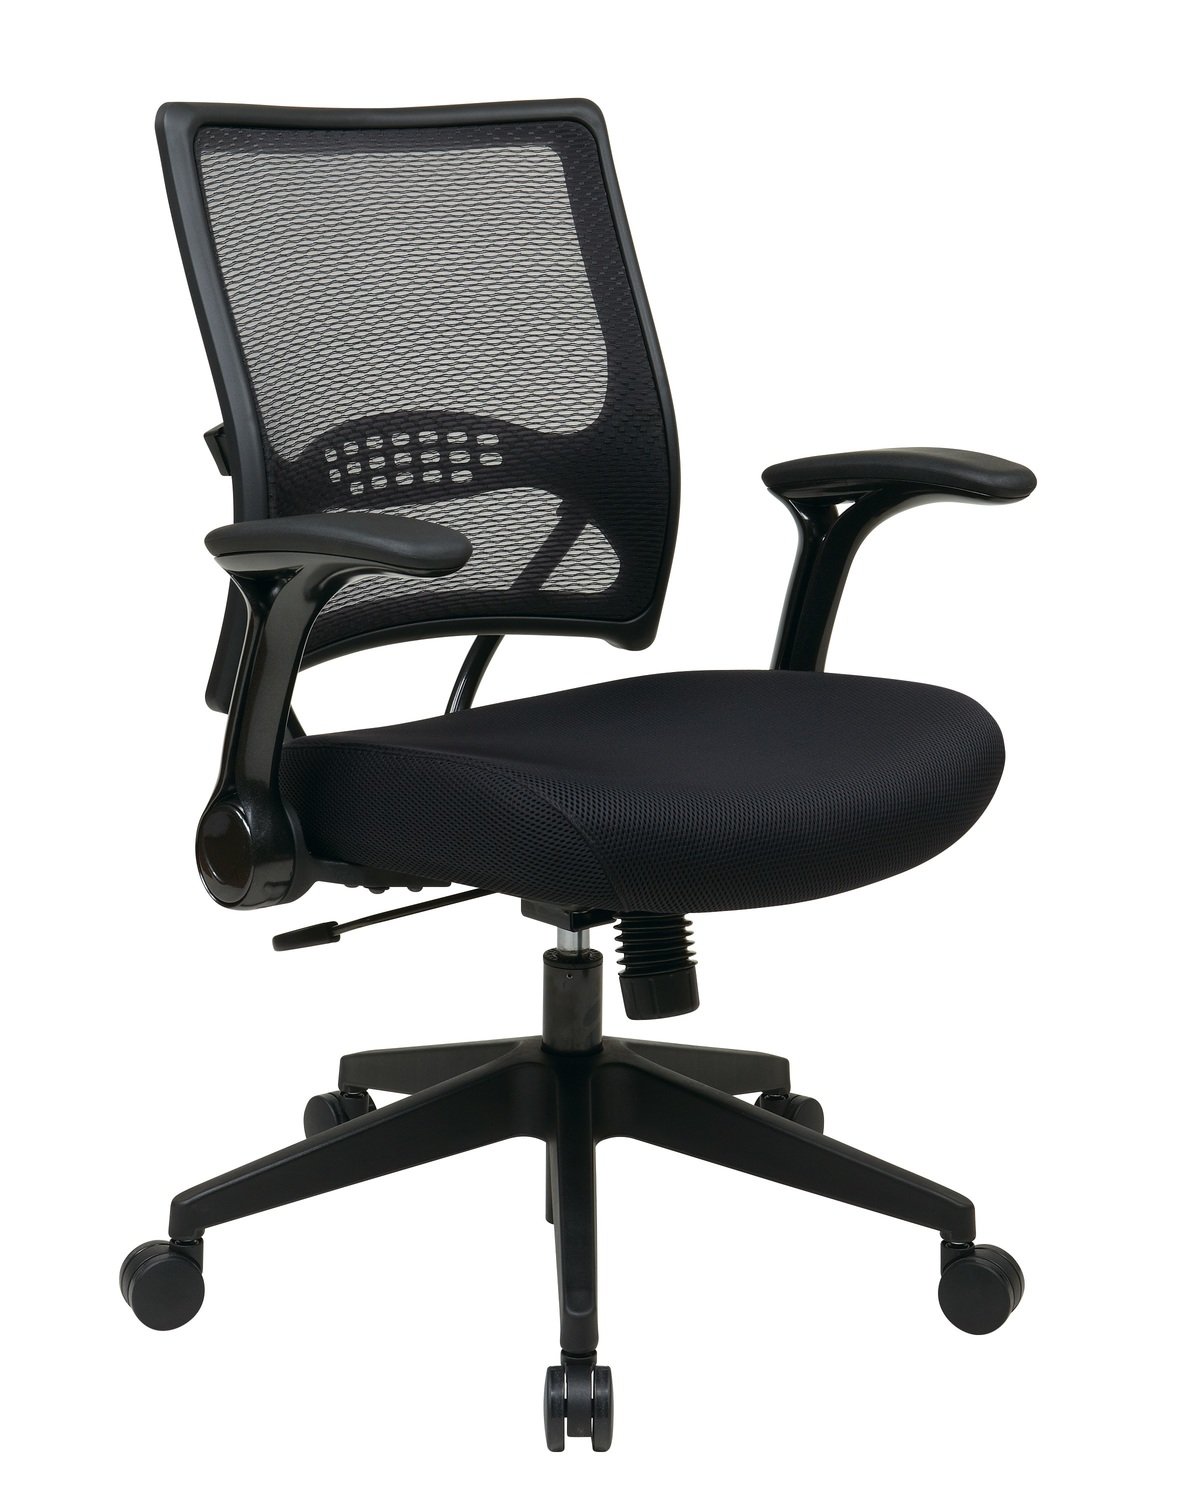 PROFESSIONAL AIRGRID MANAGERS CHAIR